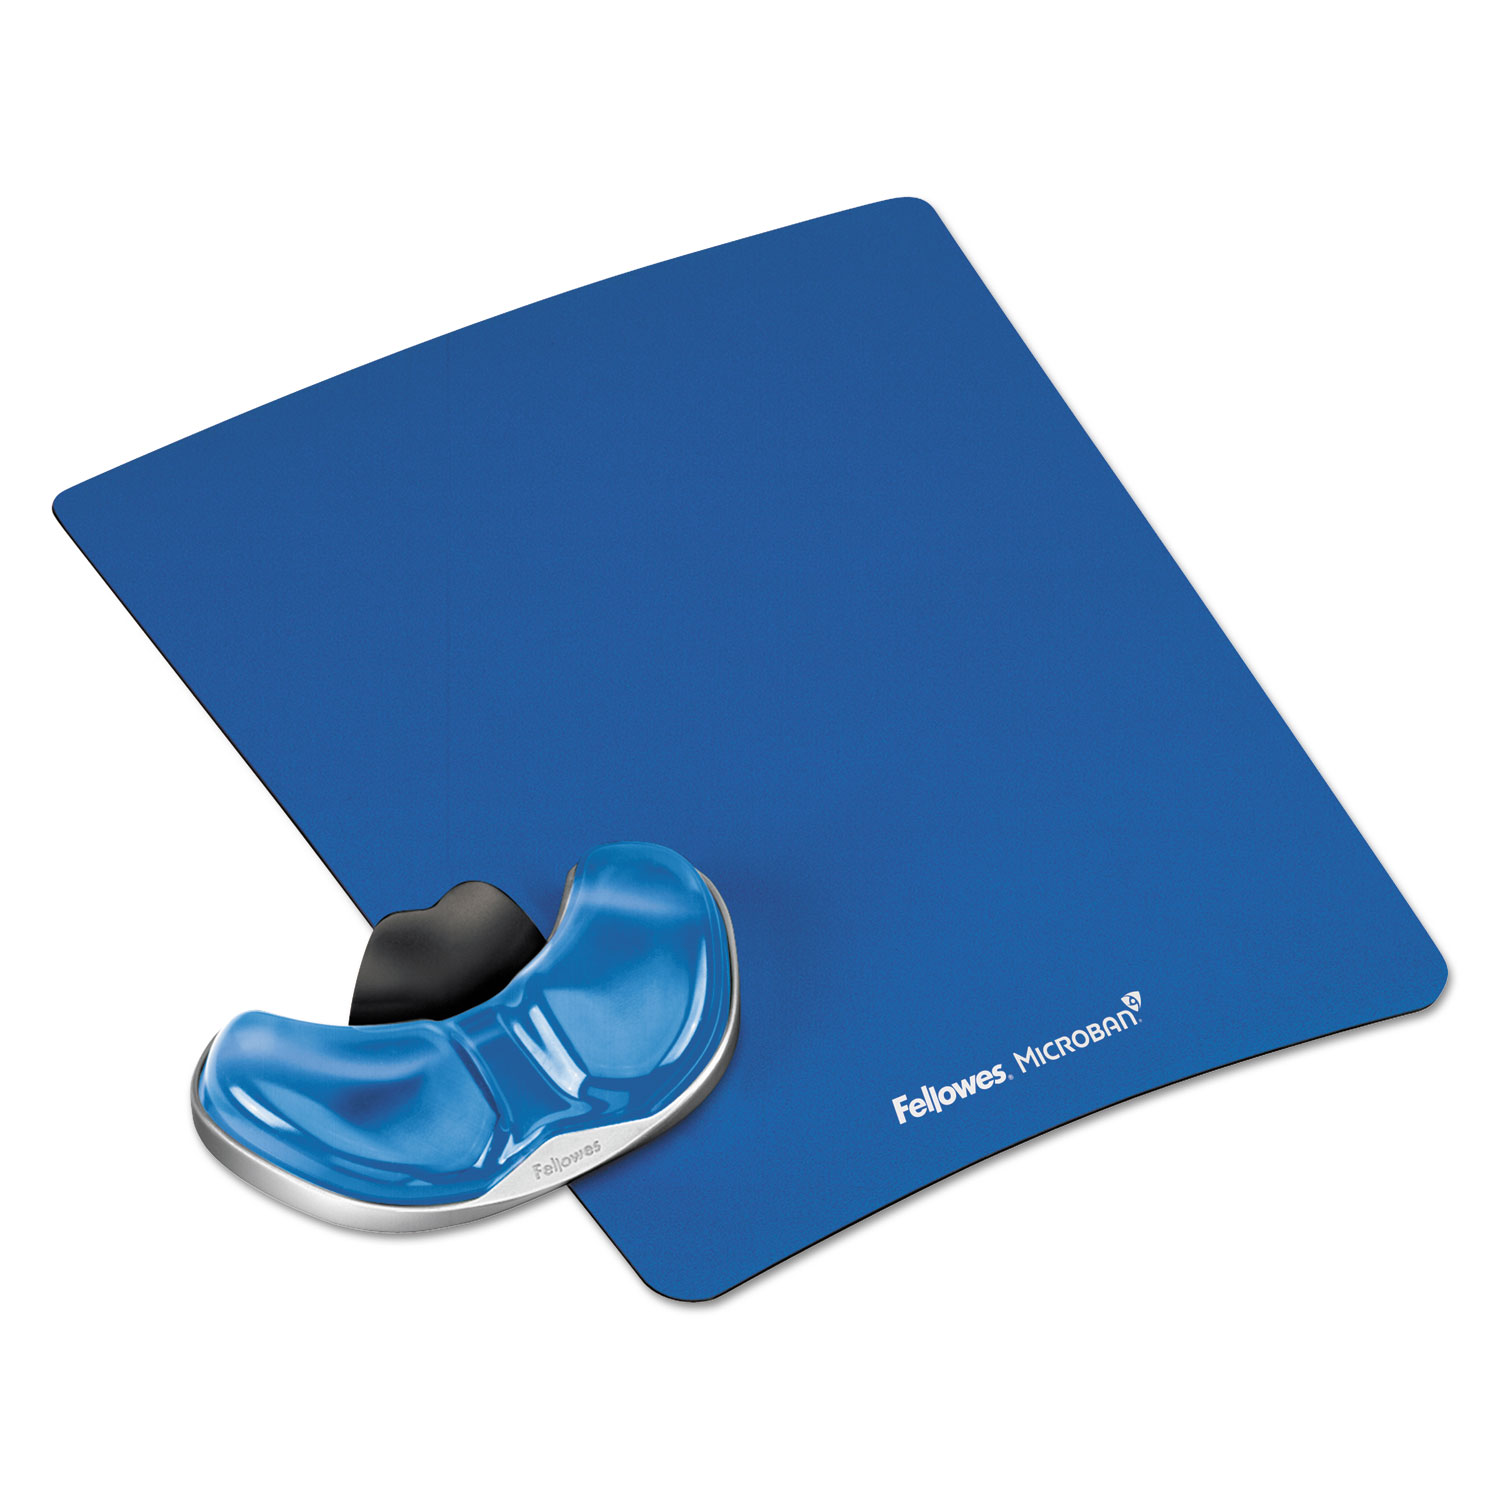  Fellowes 9180601 Gel Gliding Palm Support w/Mouse Pad, Blue (FEL9180601) 